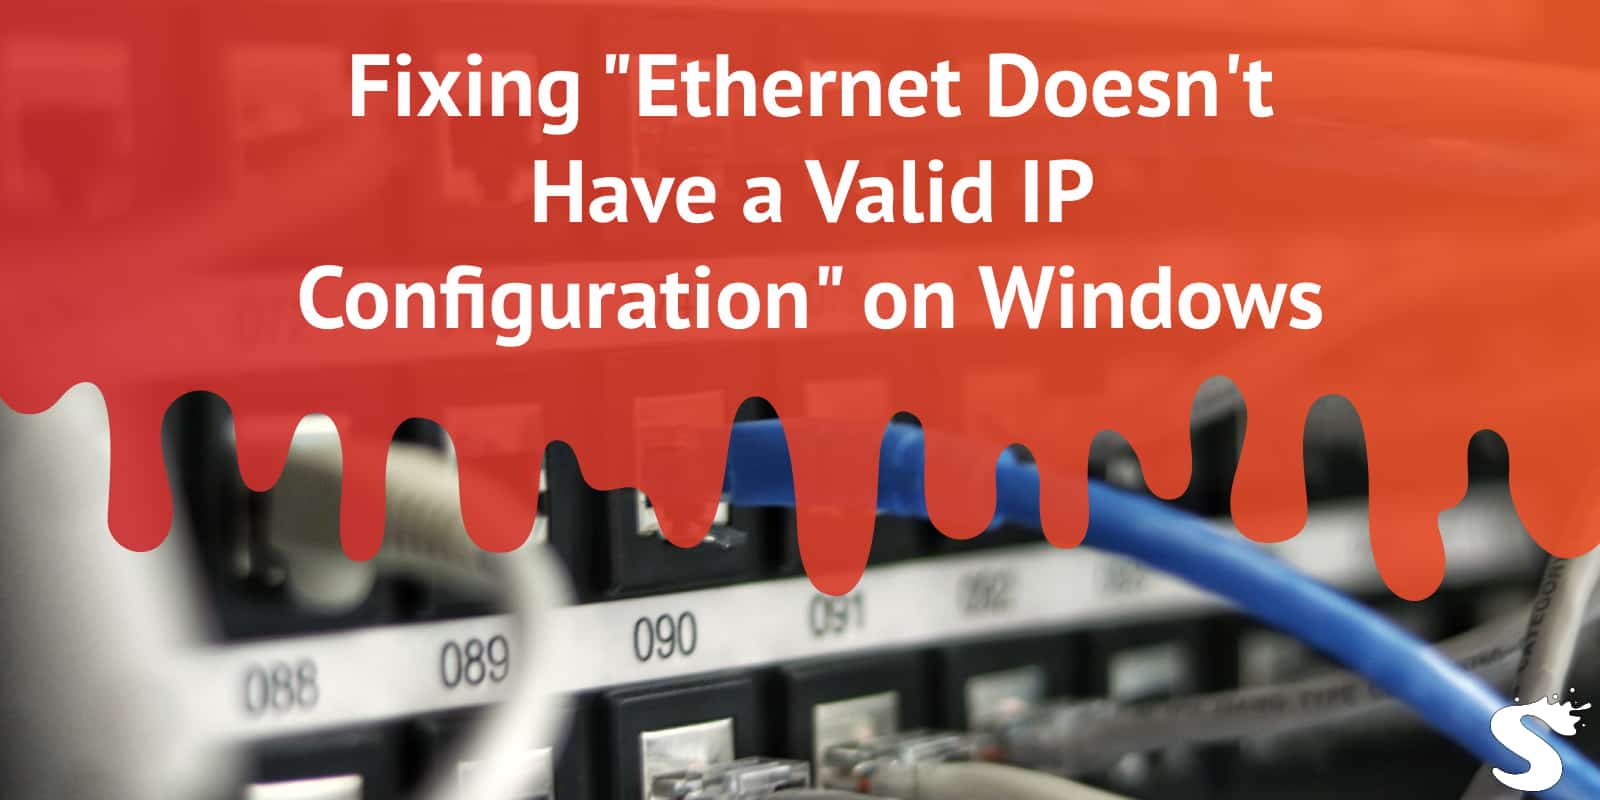 Fixing "Ethernet Doesn't Have a Valid IP Configuration" on Windows